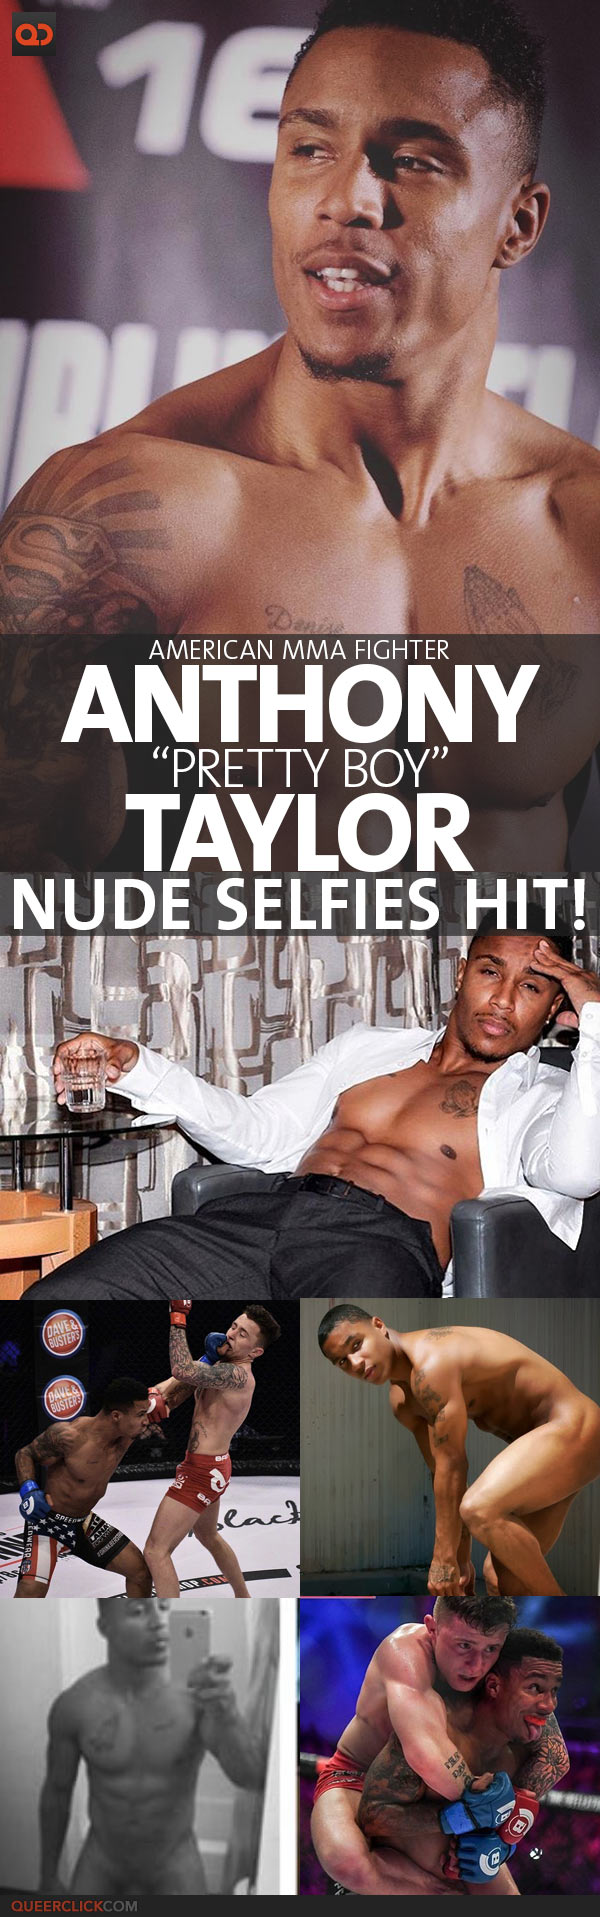 Anthony “Pretty Boy” Taylor, American MMA Fighter, Nude Selfies Hit!